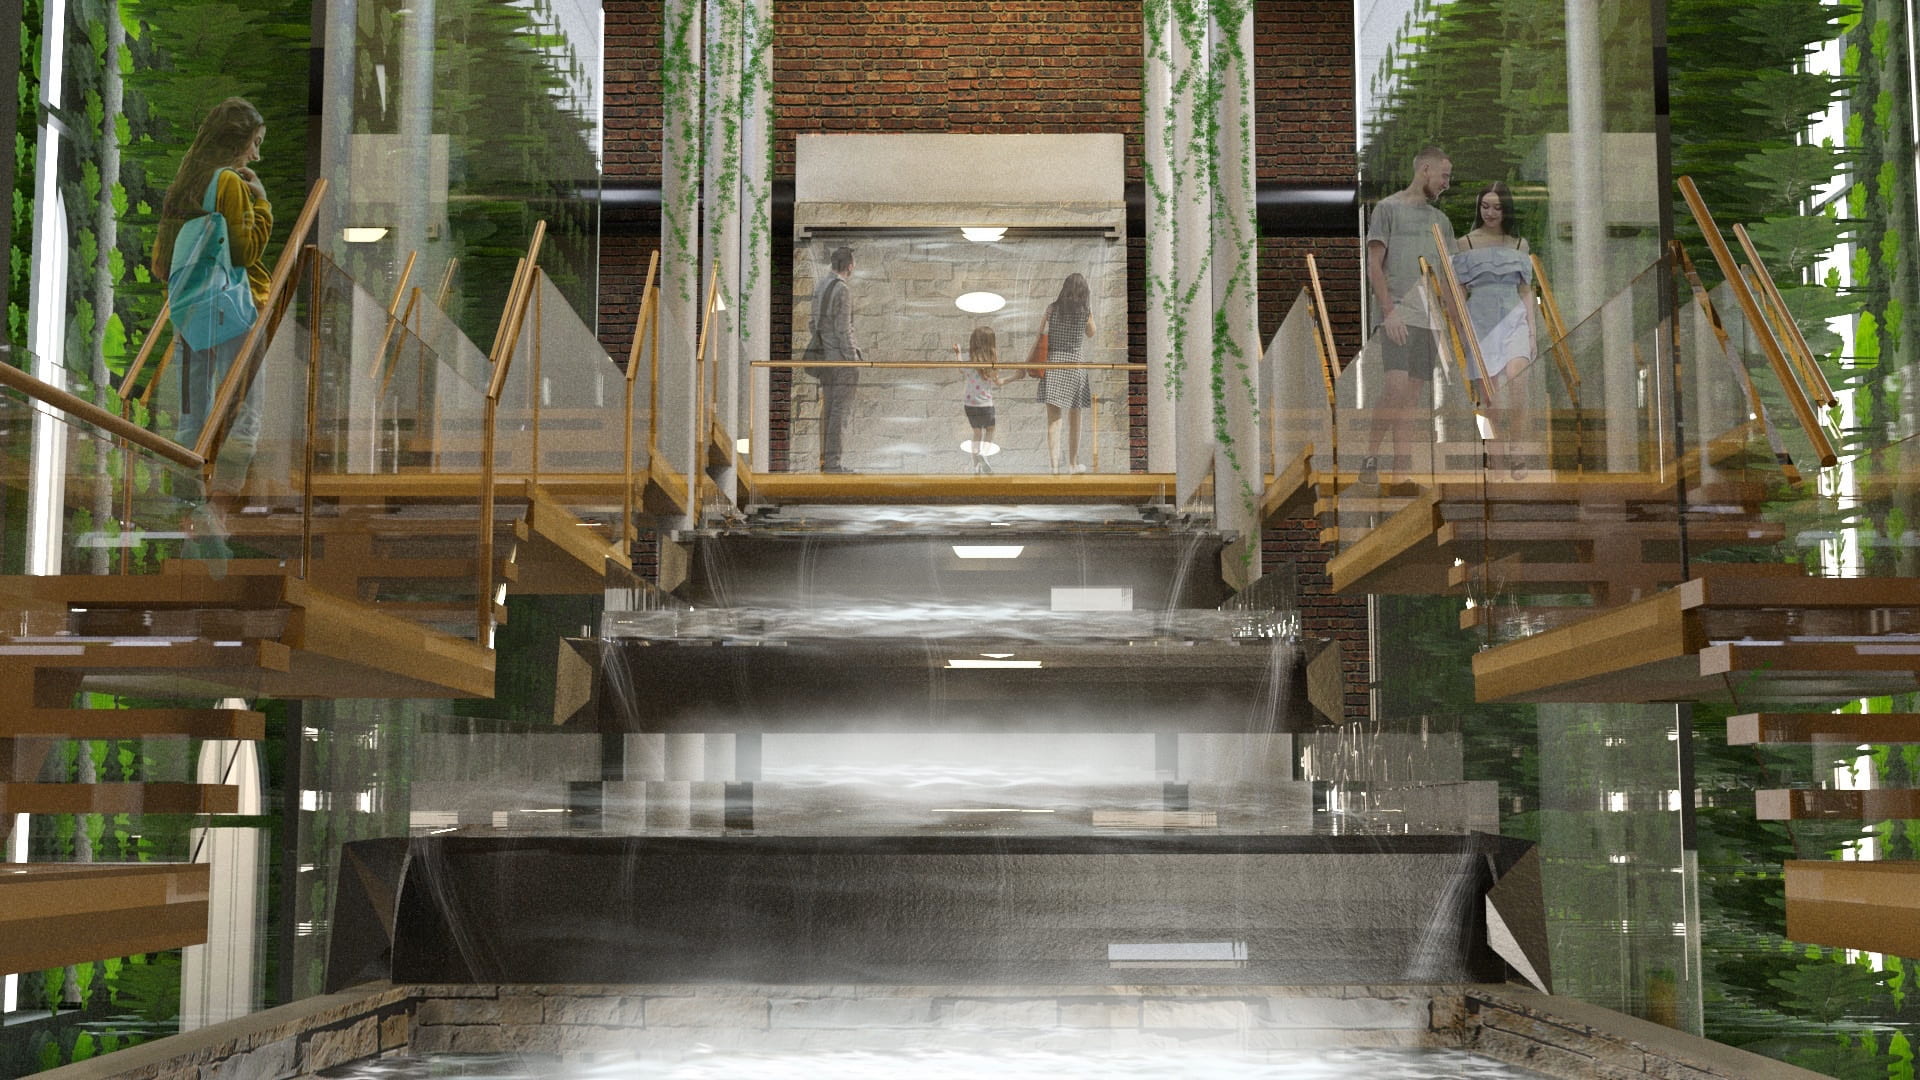 Main visual showing the waterfall travelling down through the centre of the building, completing the aquaponics cycle.